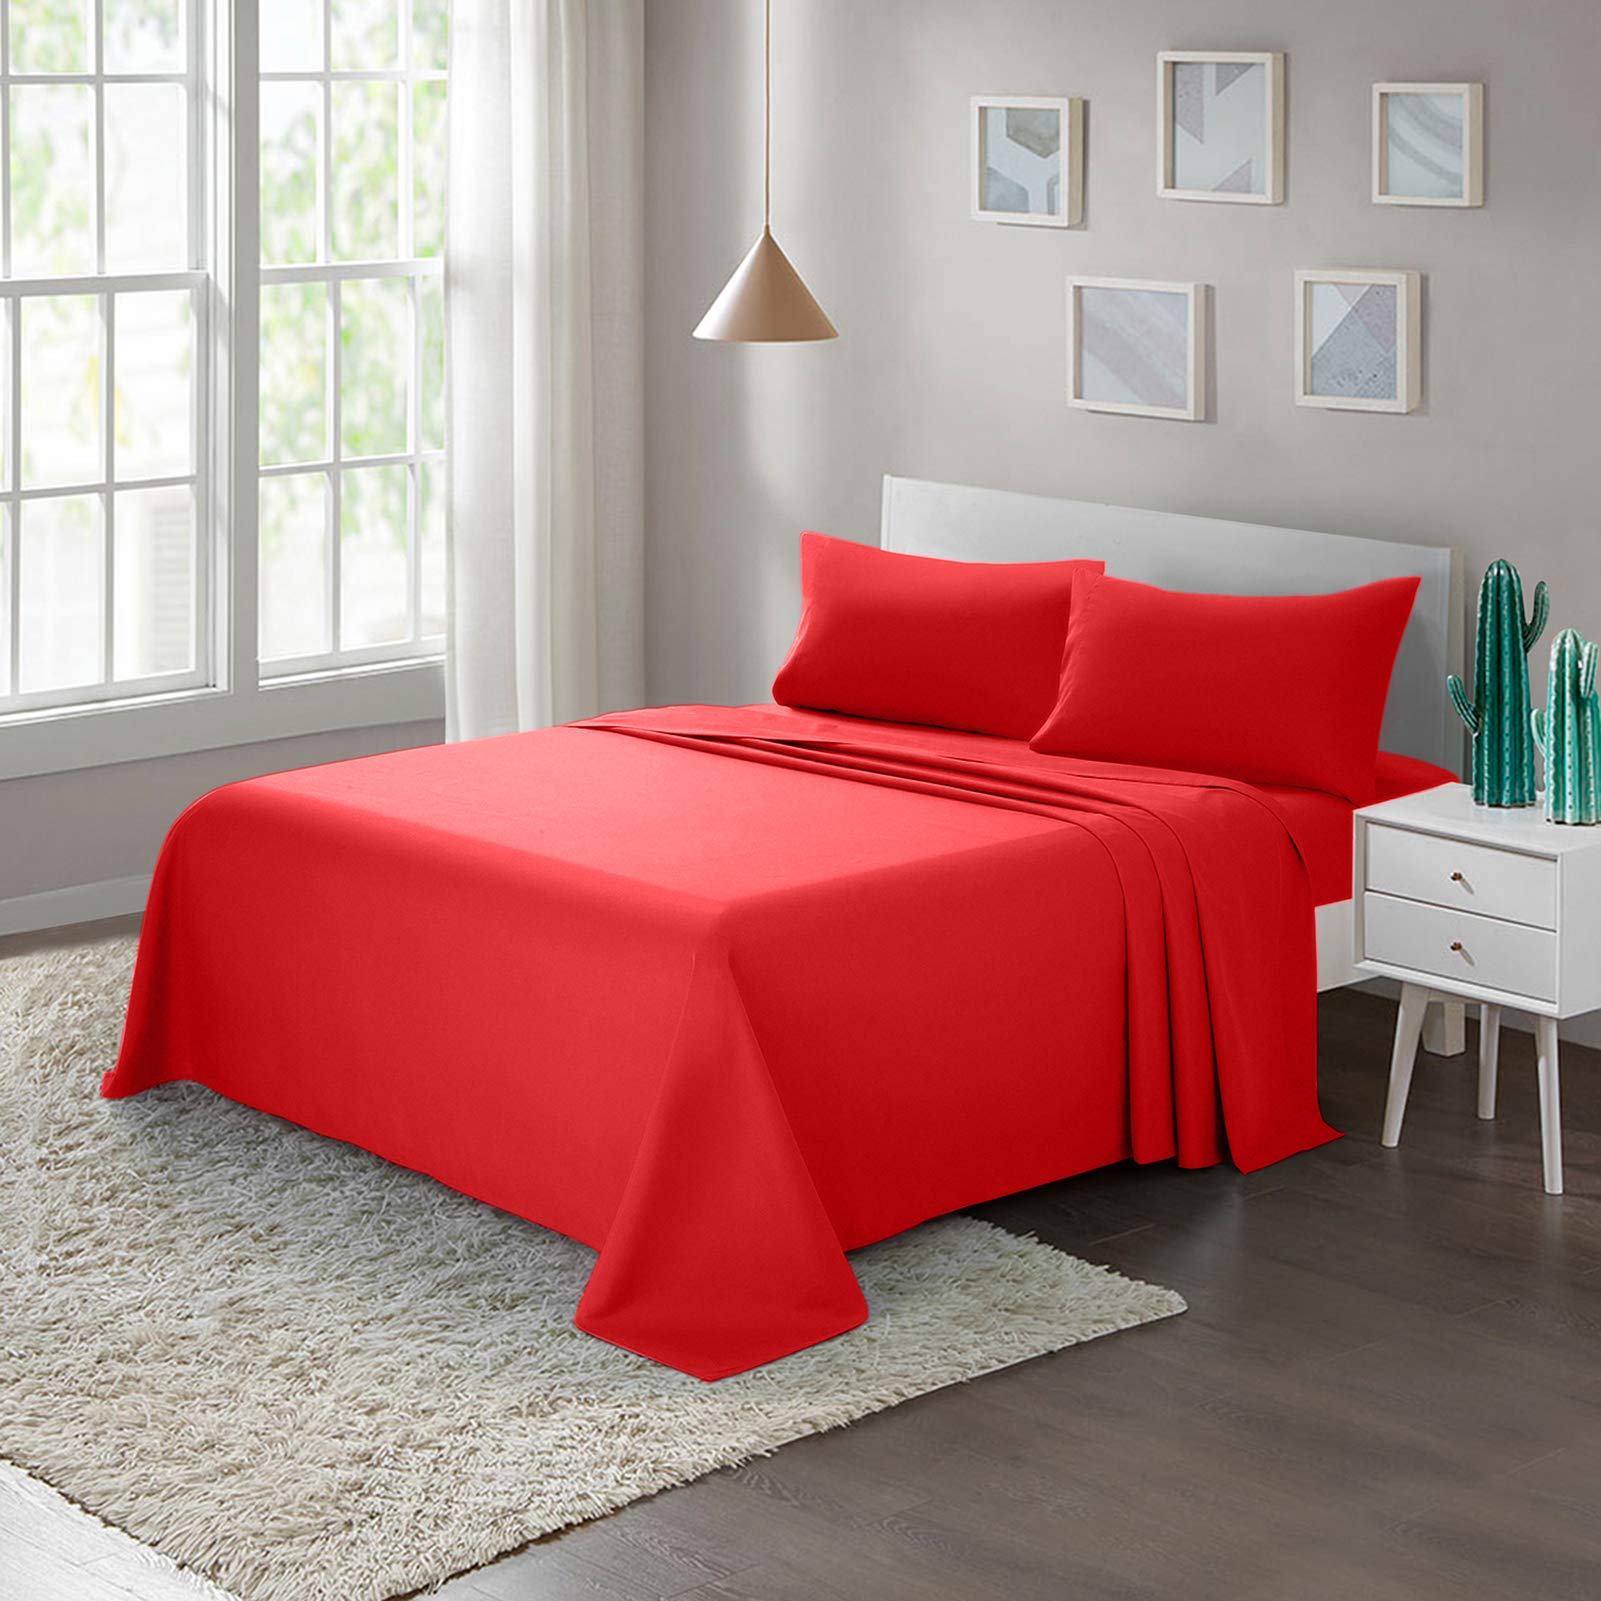 Book Cover ARTALL Soft Microfiber Bed Sheet Set 4-Piece with Deep Pocket Bedding - King, Red Red King